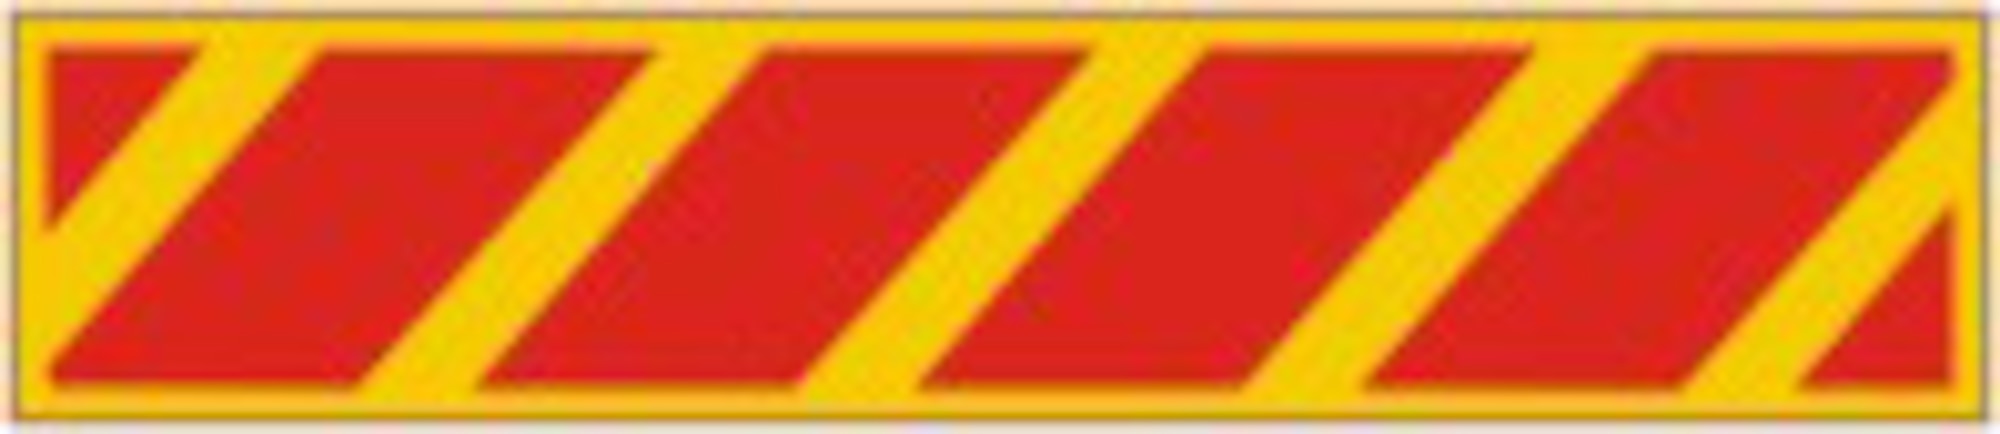 The Air Force combat action medal lapel ribbon. (U.S. Air Force graphic)